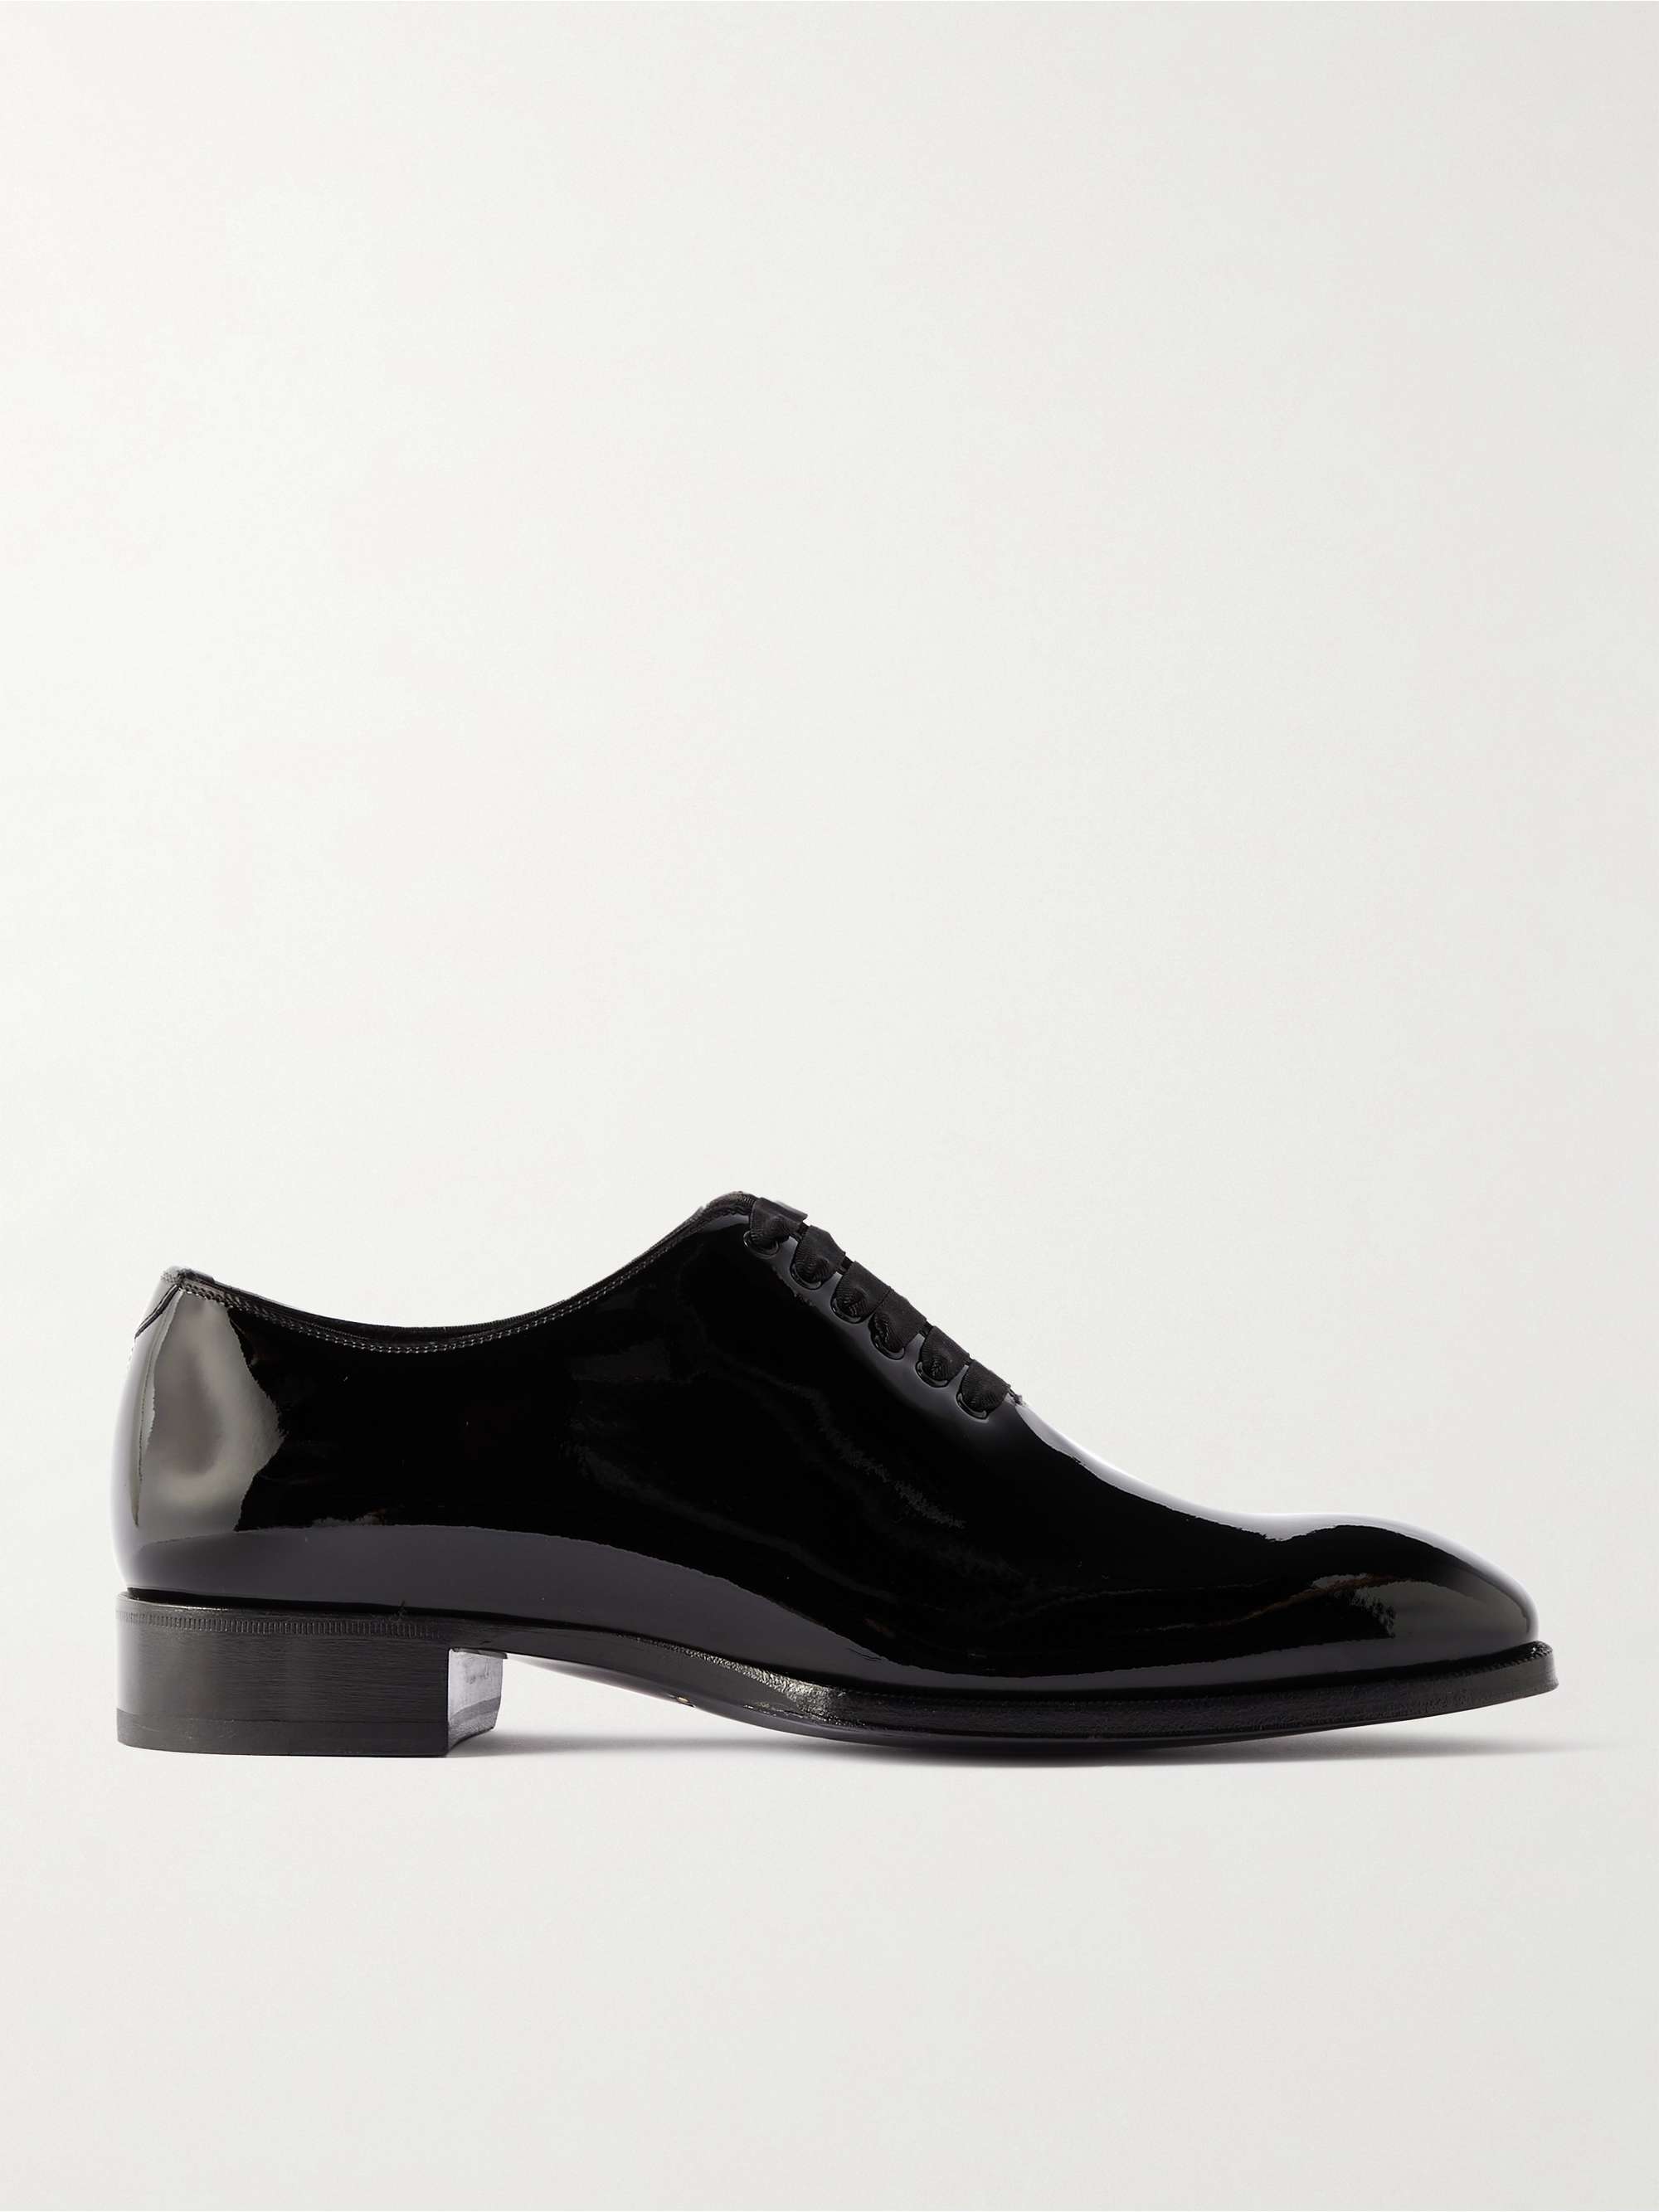 Elkan Whole-Cut Patent-Leather Oxford Shoes